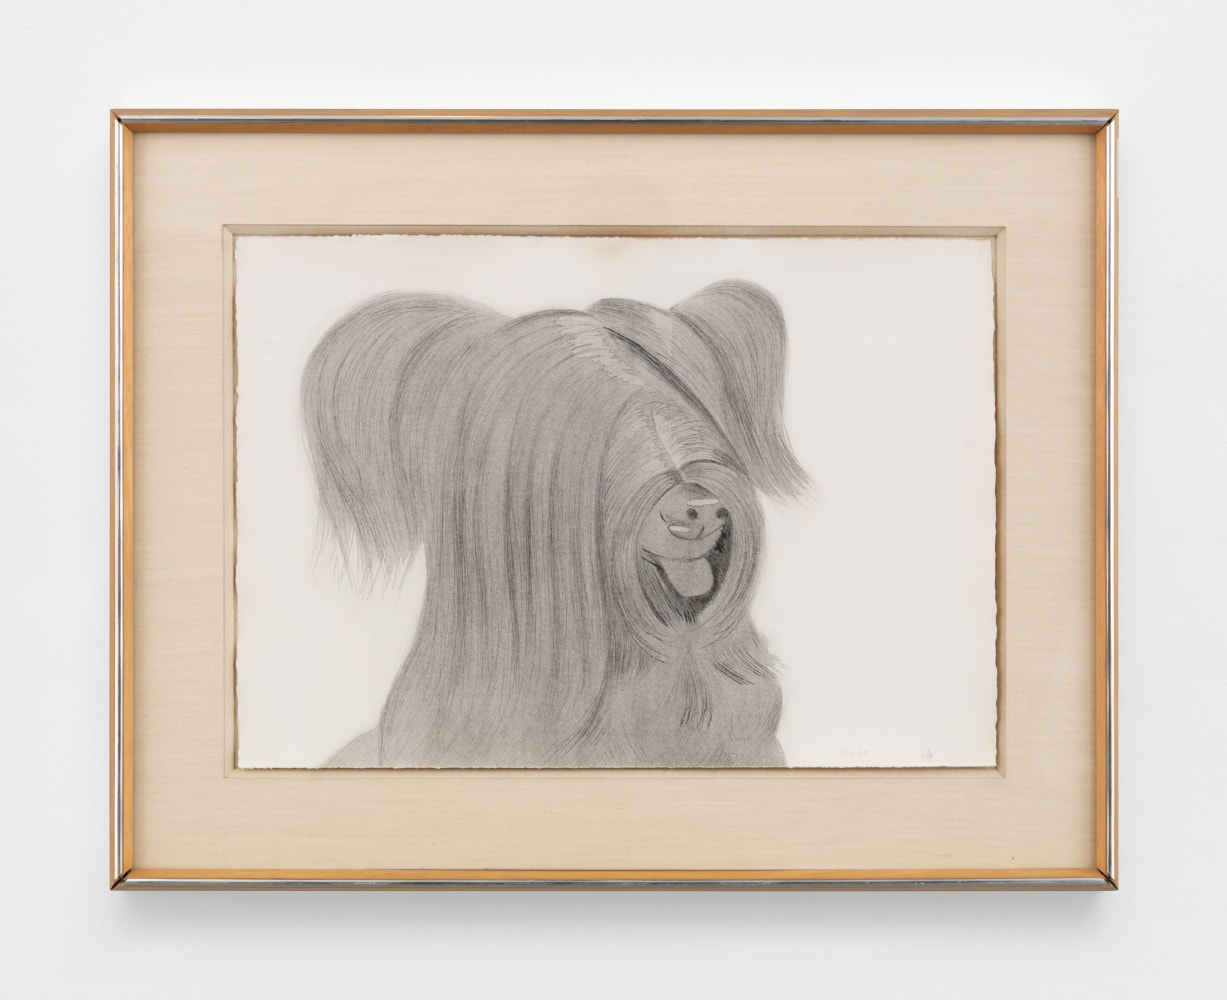 Sunny, 1974

aquatint and drypoint, edition of 52

15 x 22 3/8 in. / 38.1 x 56.8 cm